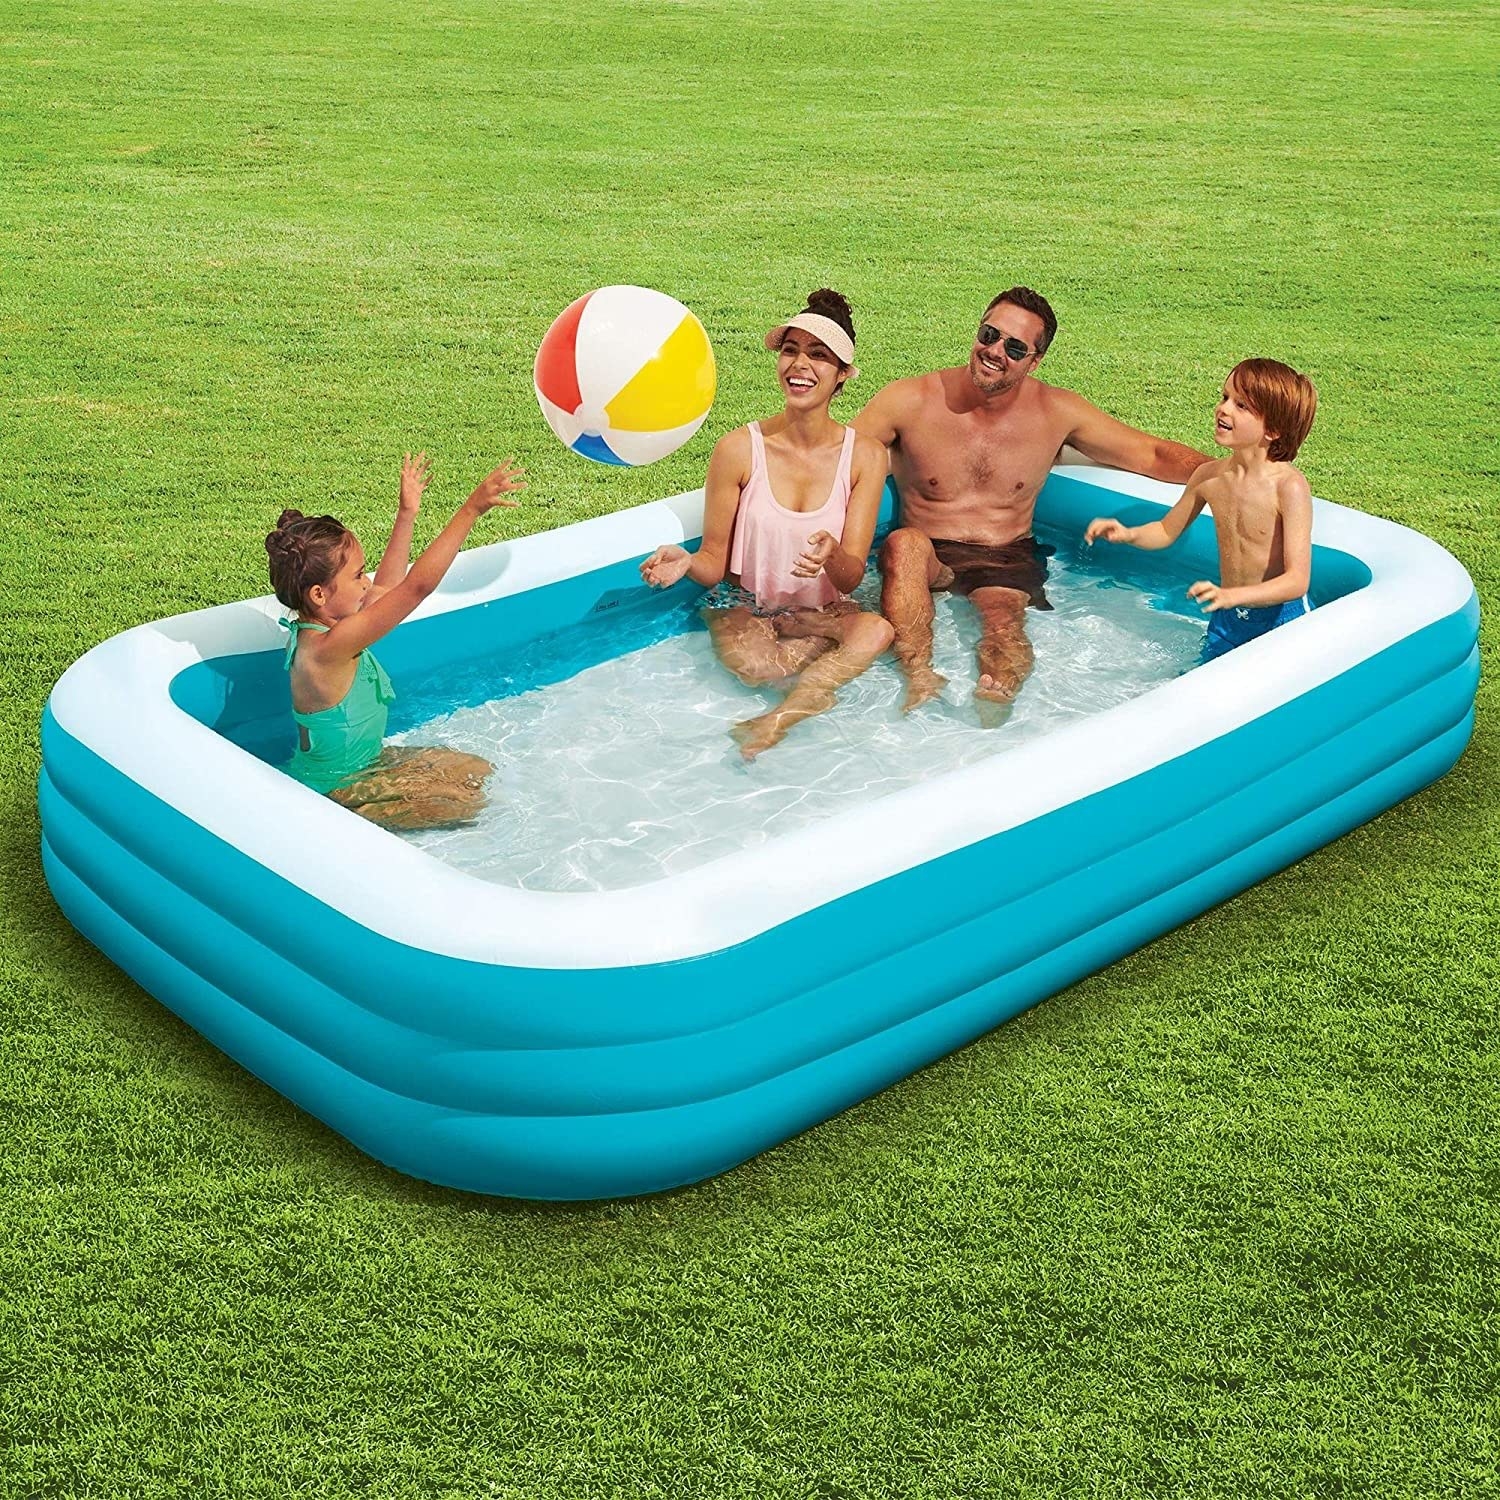 A family of four plays with a ball inside the pool